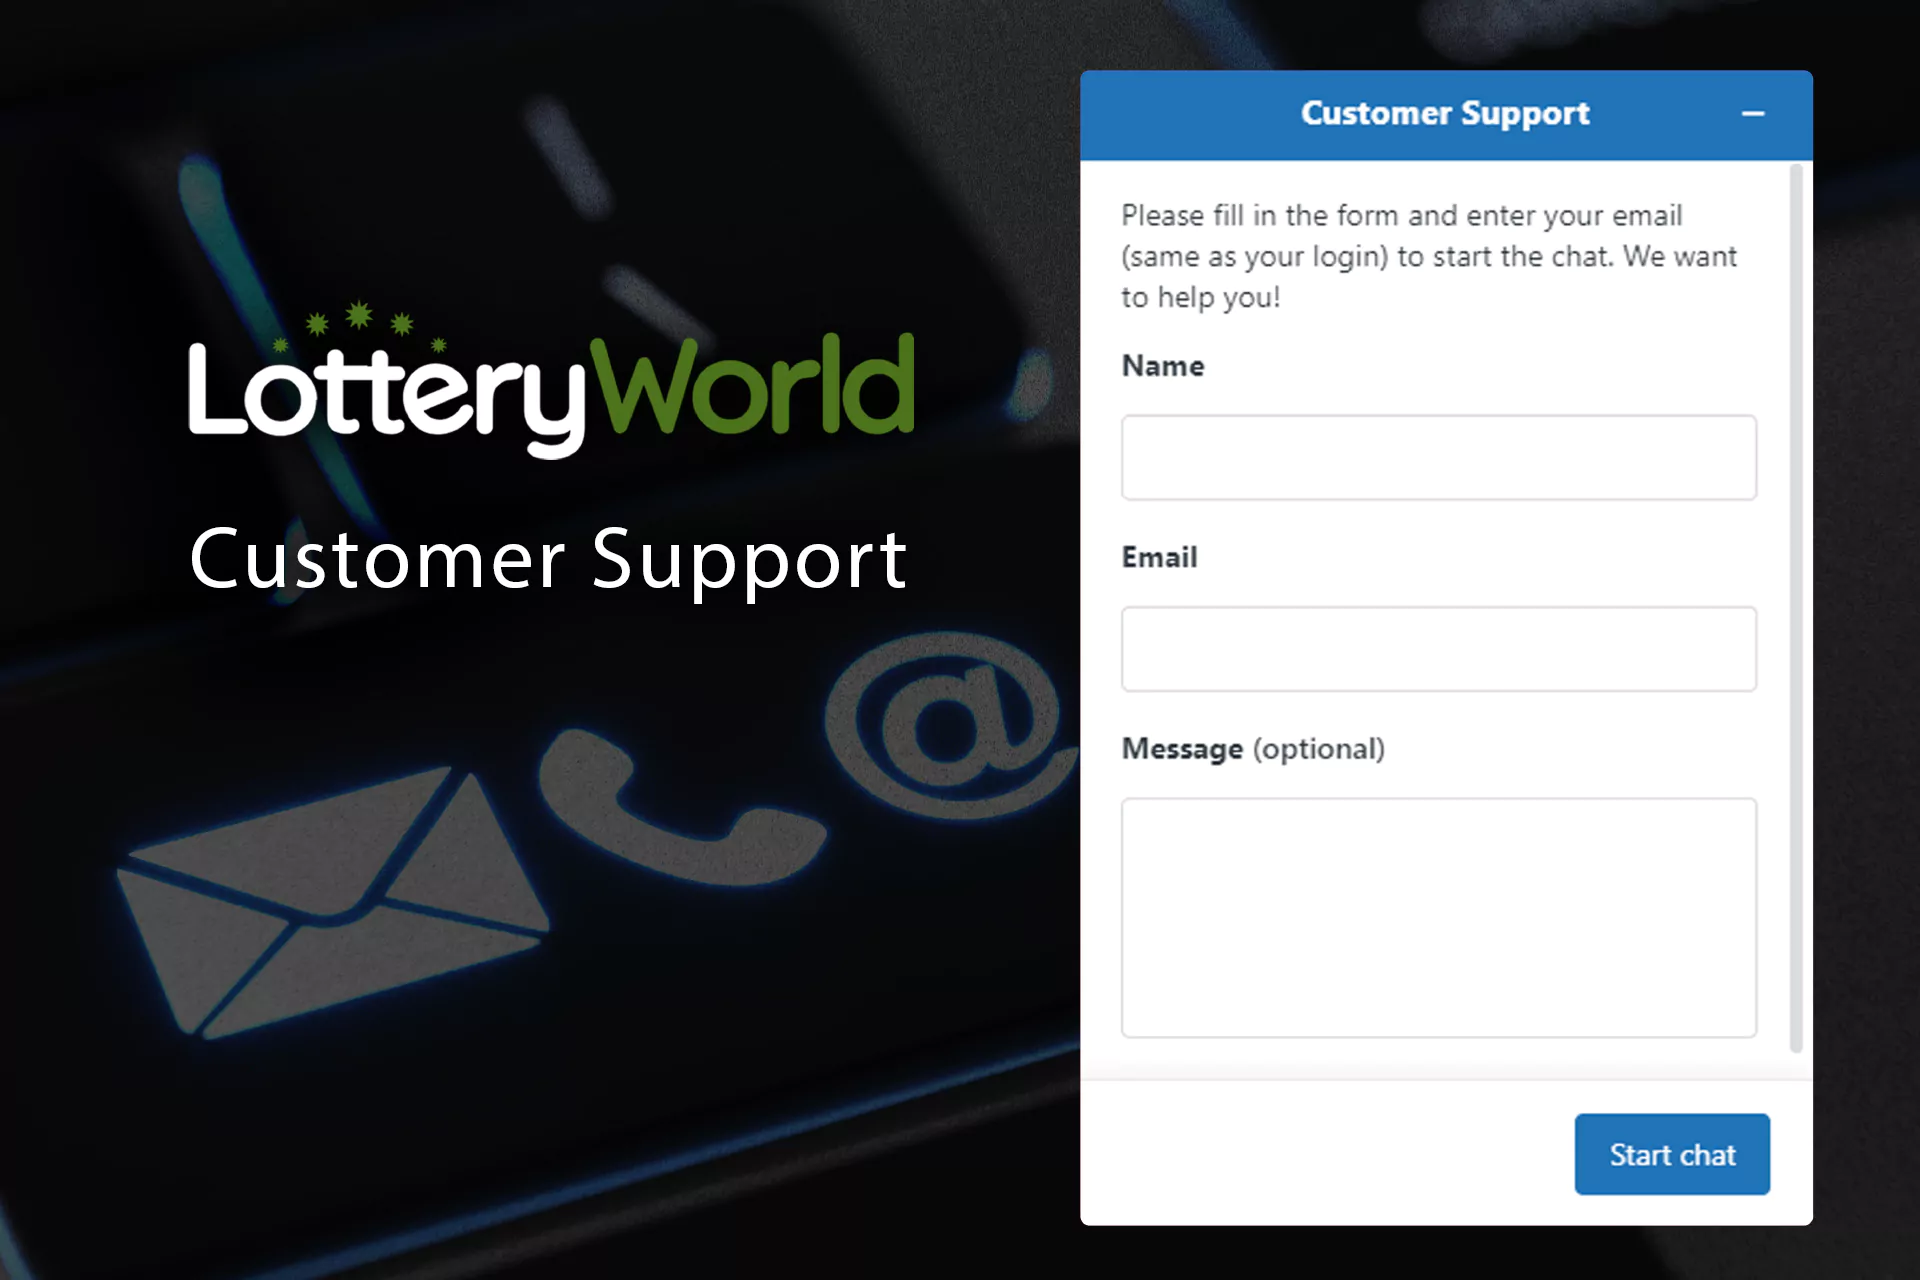 If you face any problems, let the customer support of LotteryWorld know.